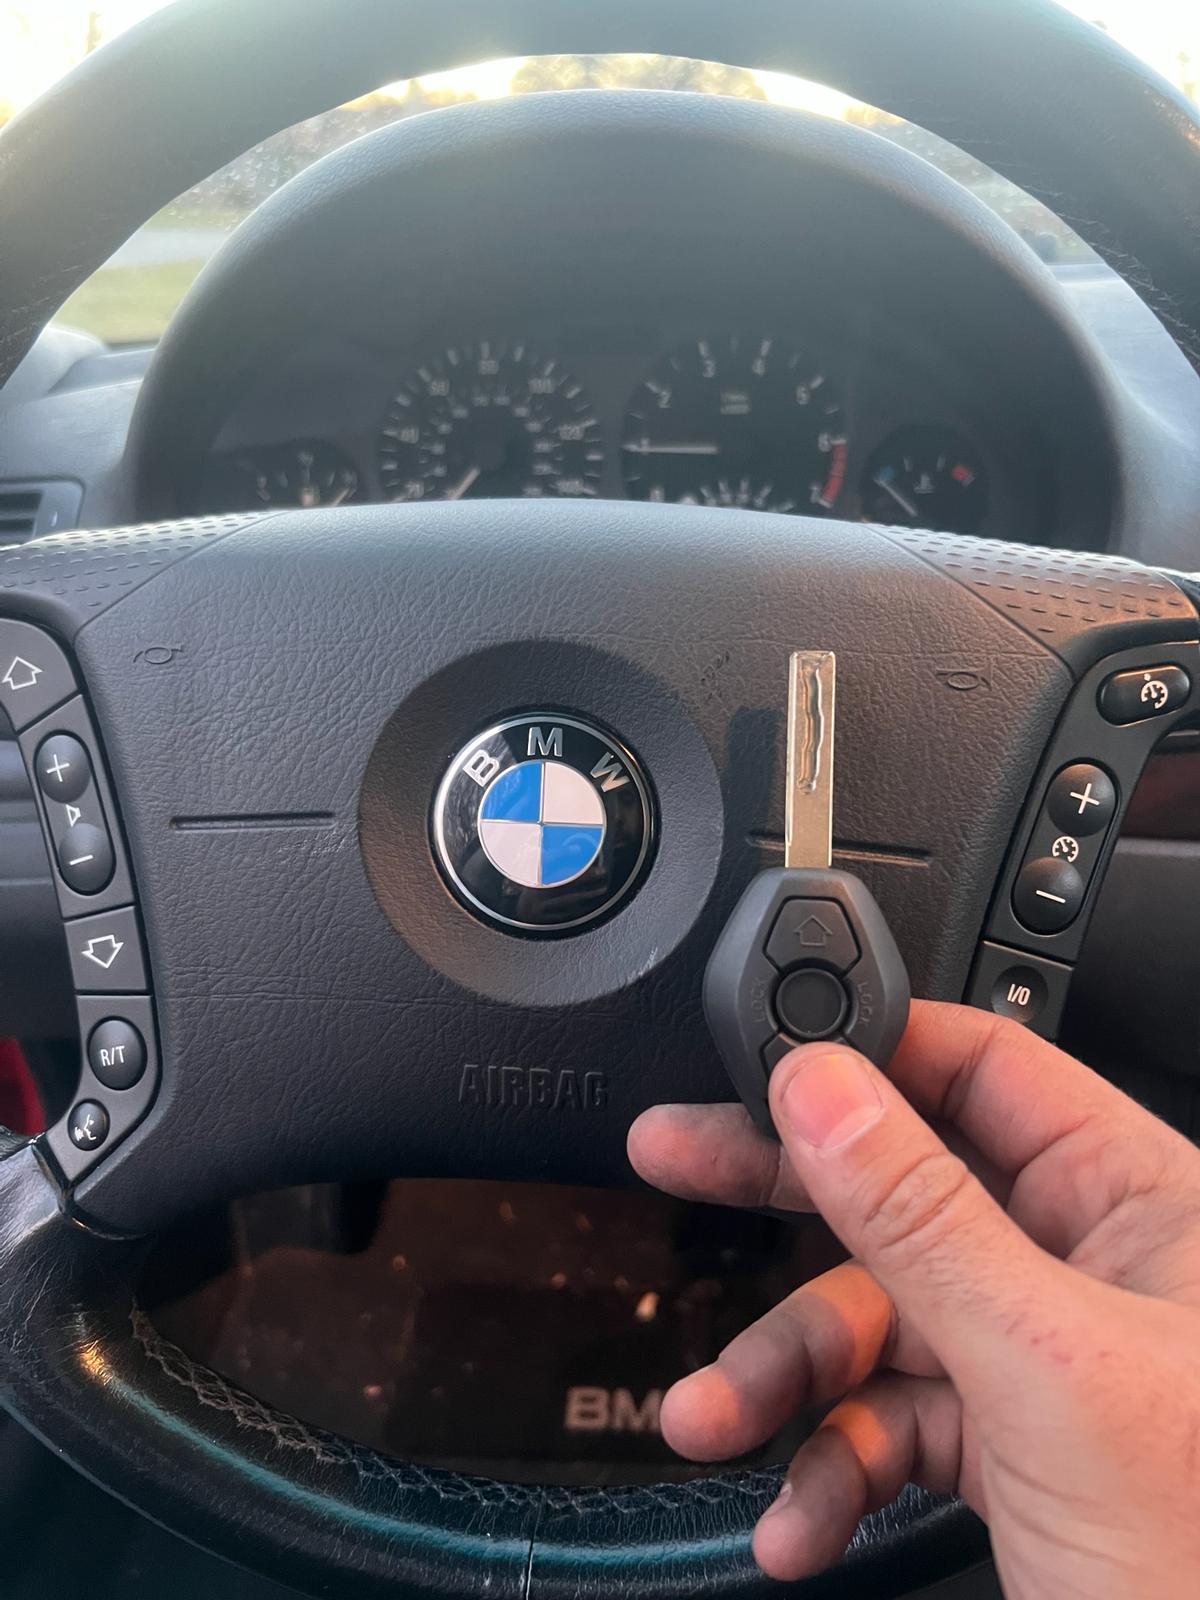 BMW keys replacement Louisville KY (6)